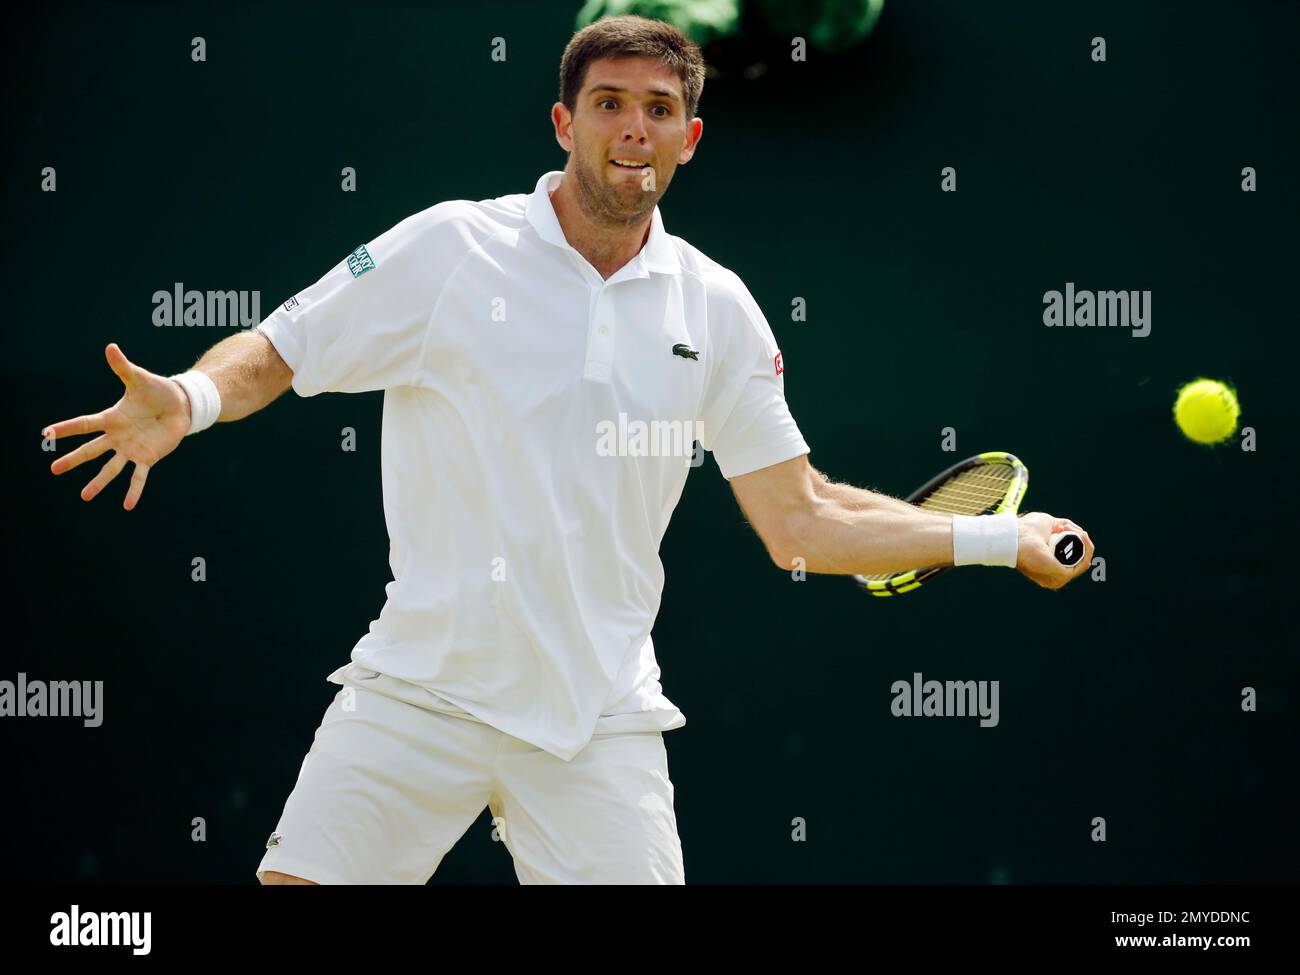 Federico Delbonis of Argentina returns to Fabio Fognini of Italy during  their men's singles match on day four of the Wimbledon Tennis Championships  in London, Thursday, June 30, 2016. (AP Photo/Alastair Grant